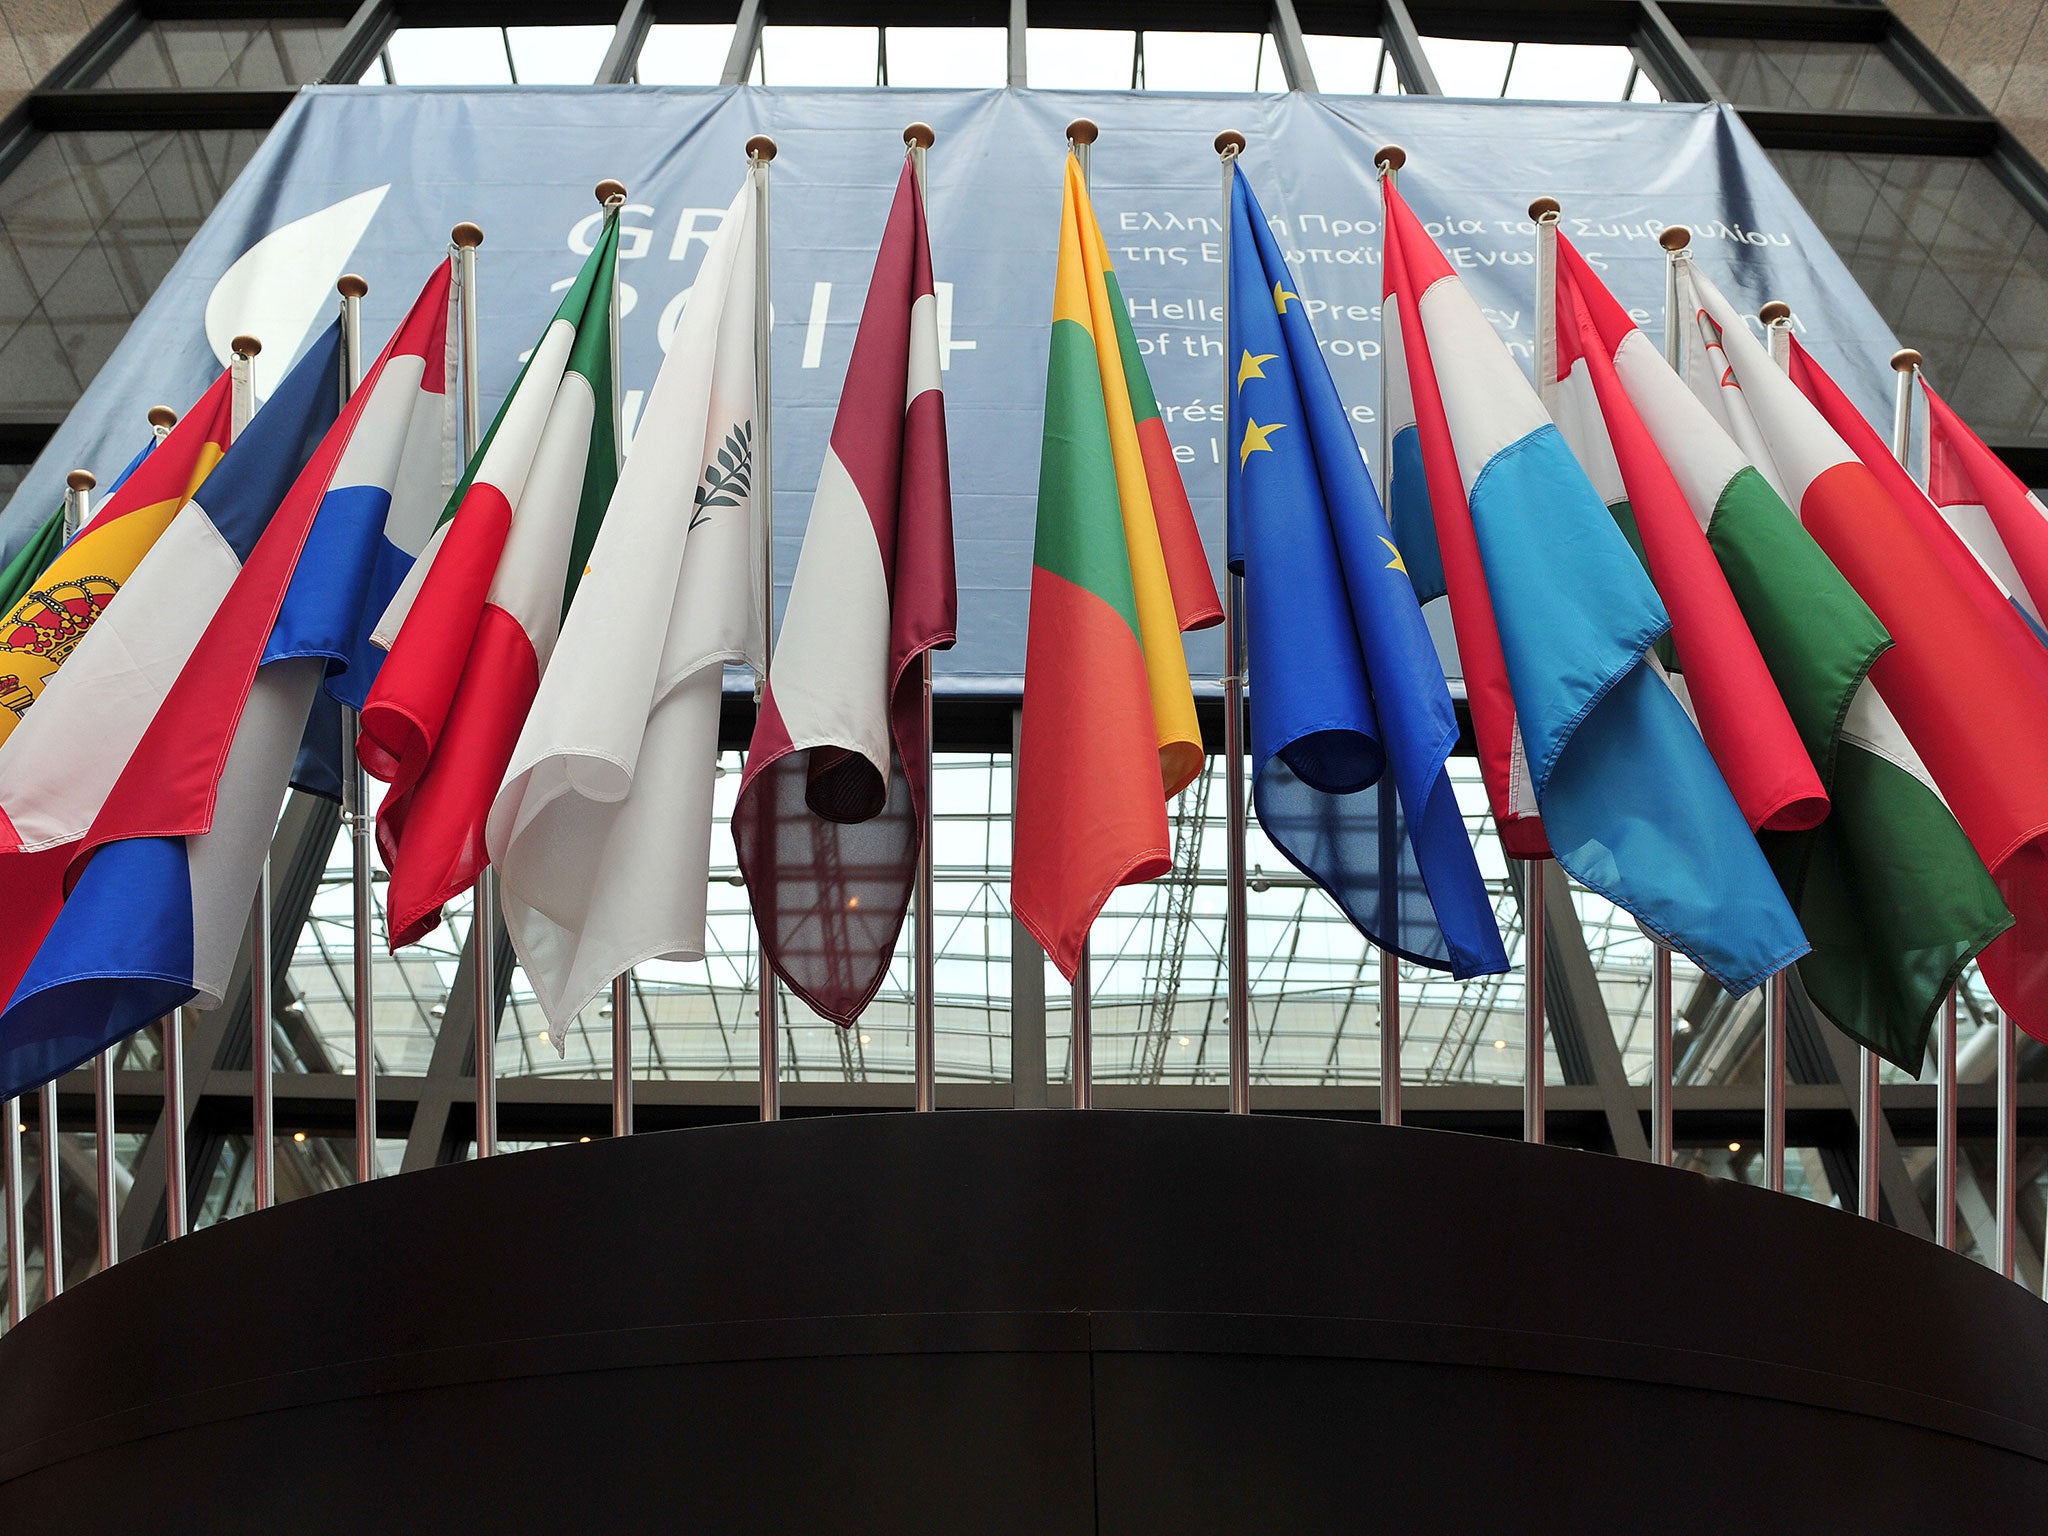 Flags of European countries above the entrance of the European Council